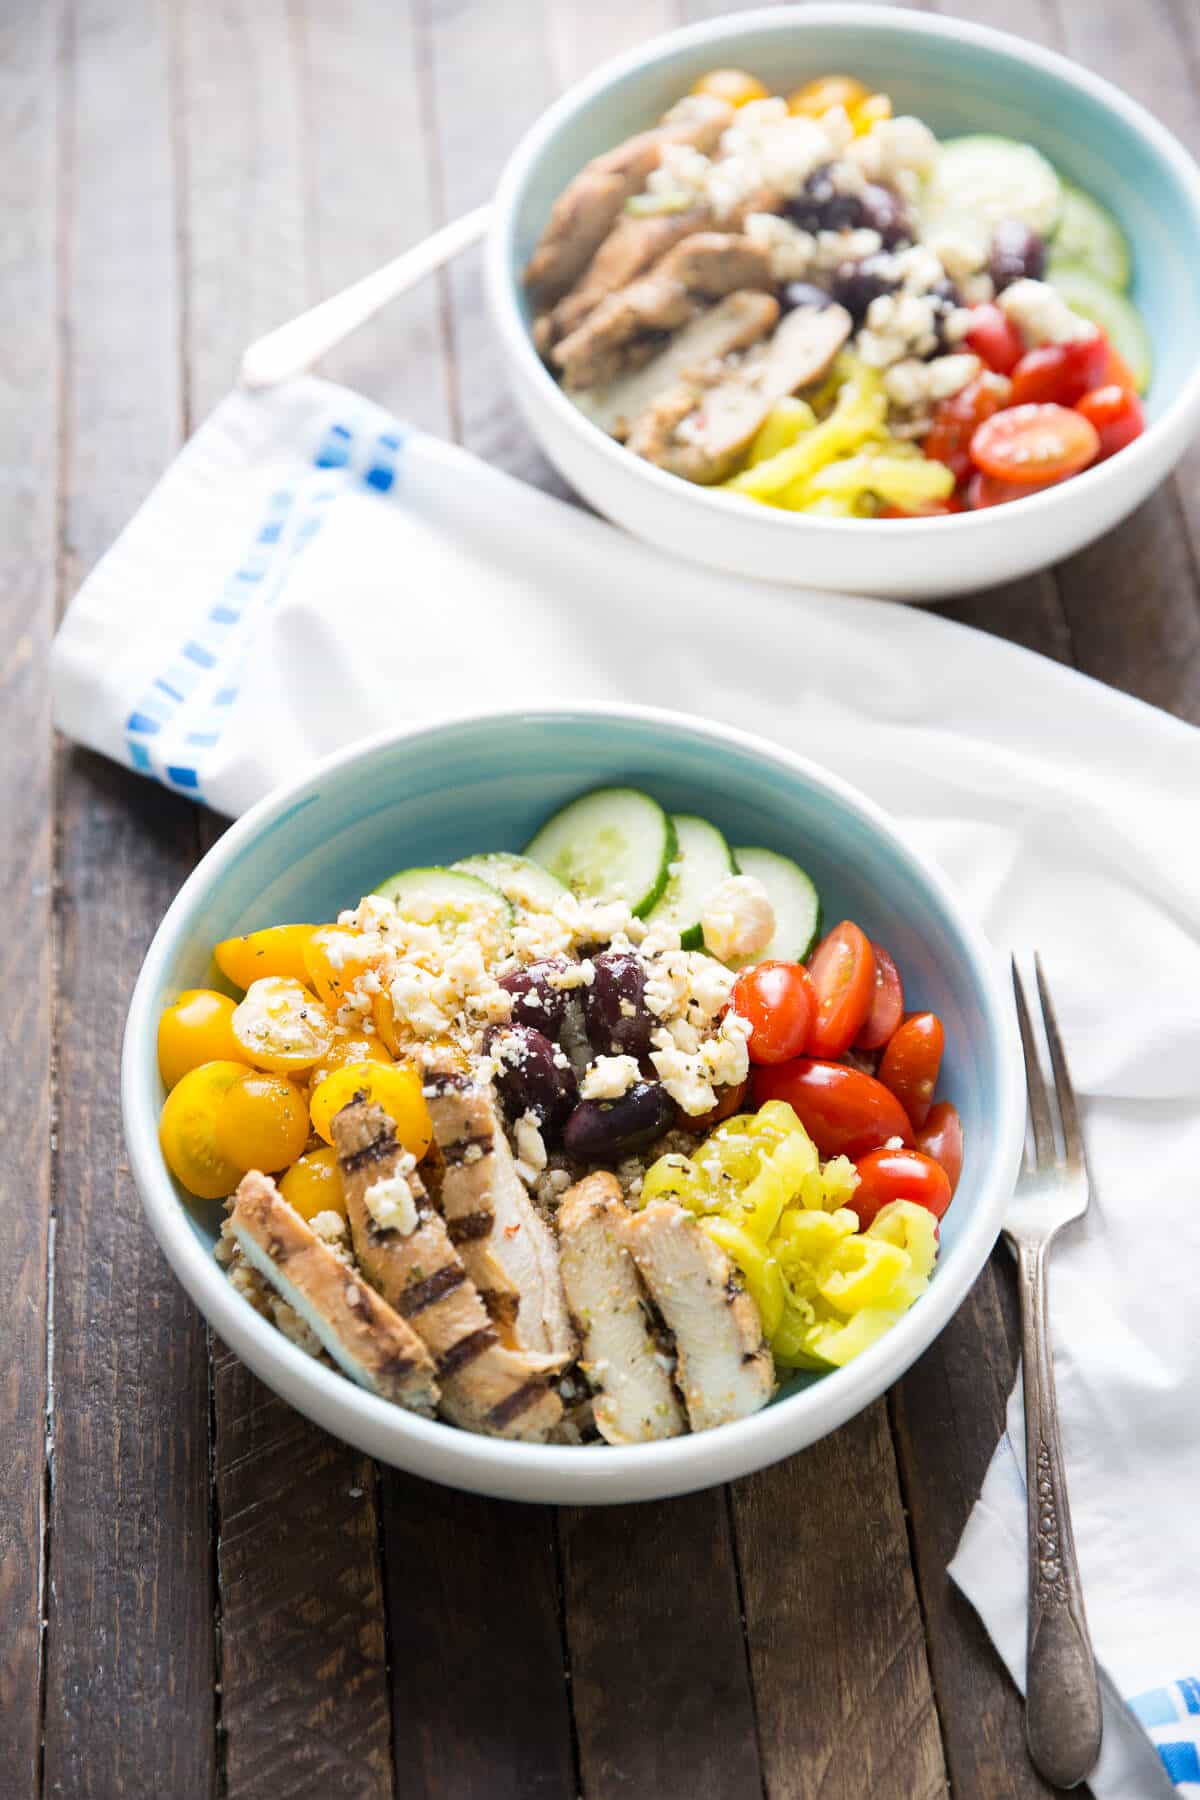 This Mediterranean Chicken bowl is both healthy and delicious! This light meal is quick and easy too! lemonsforlulu.com